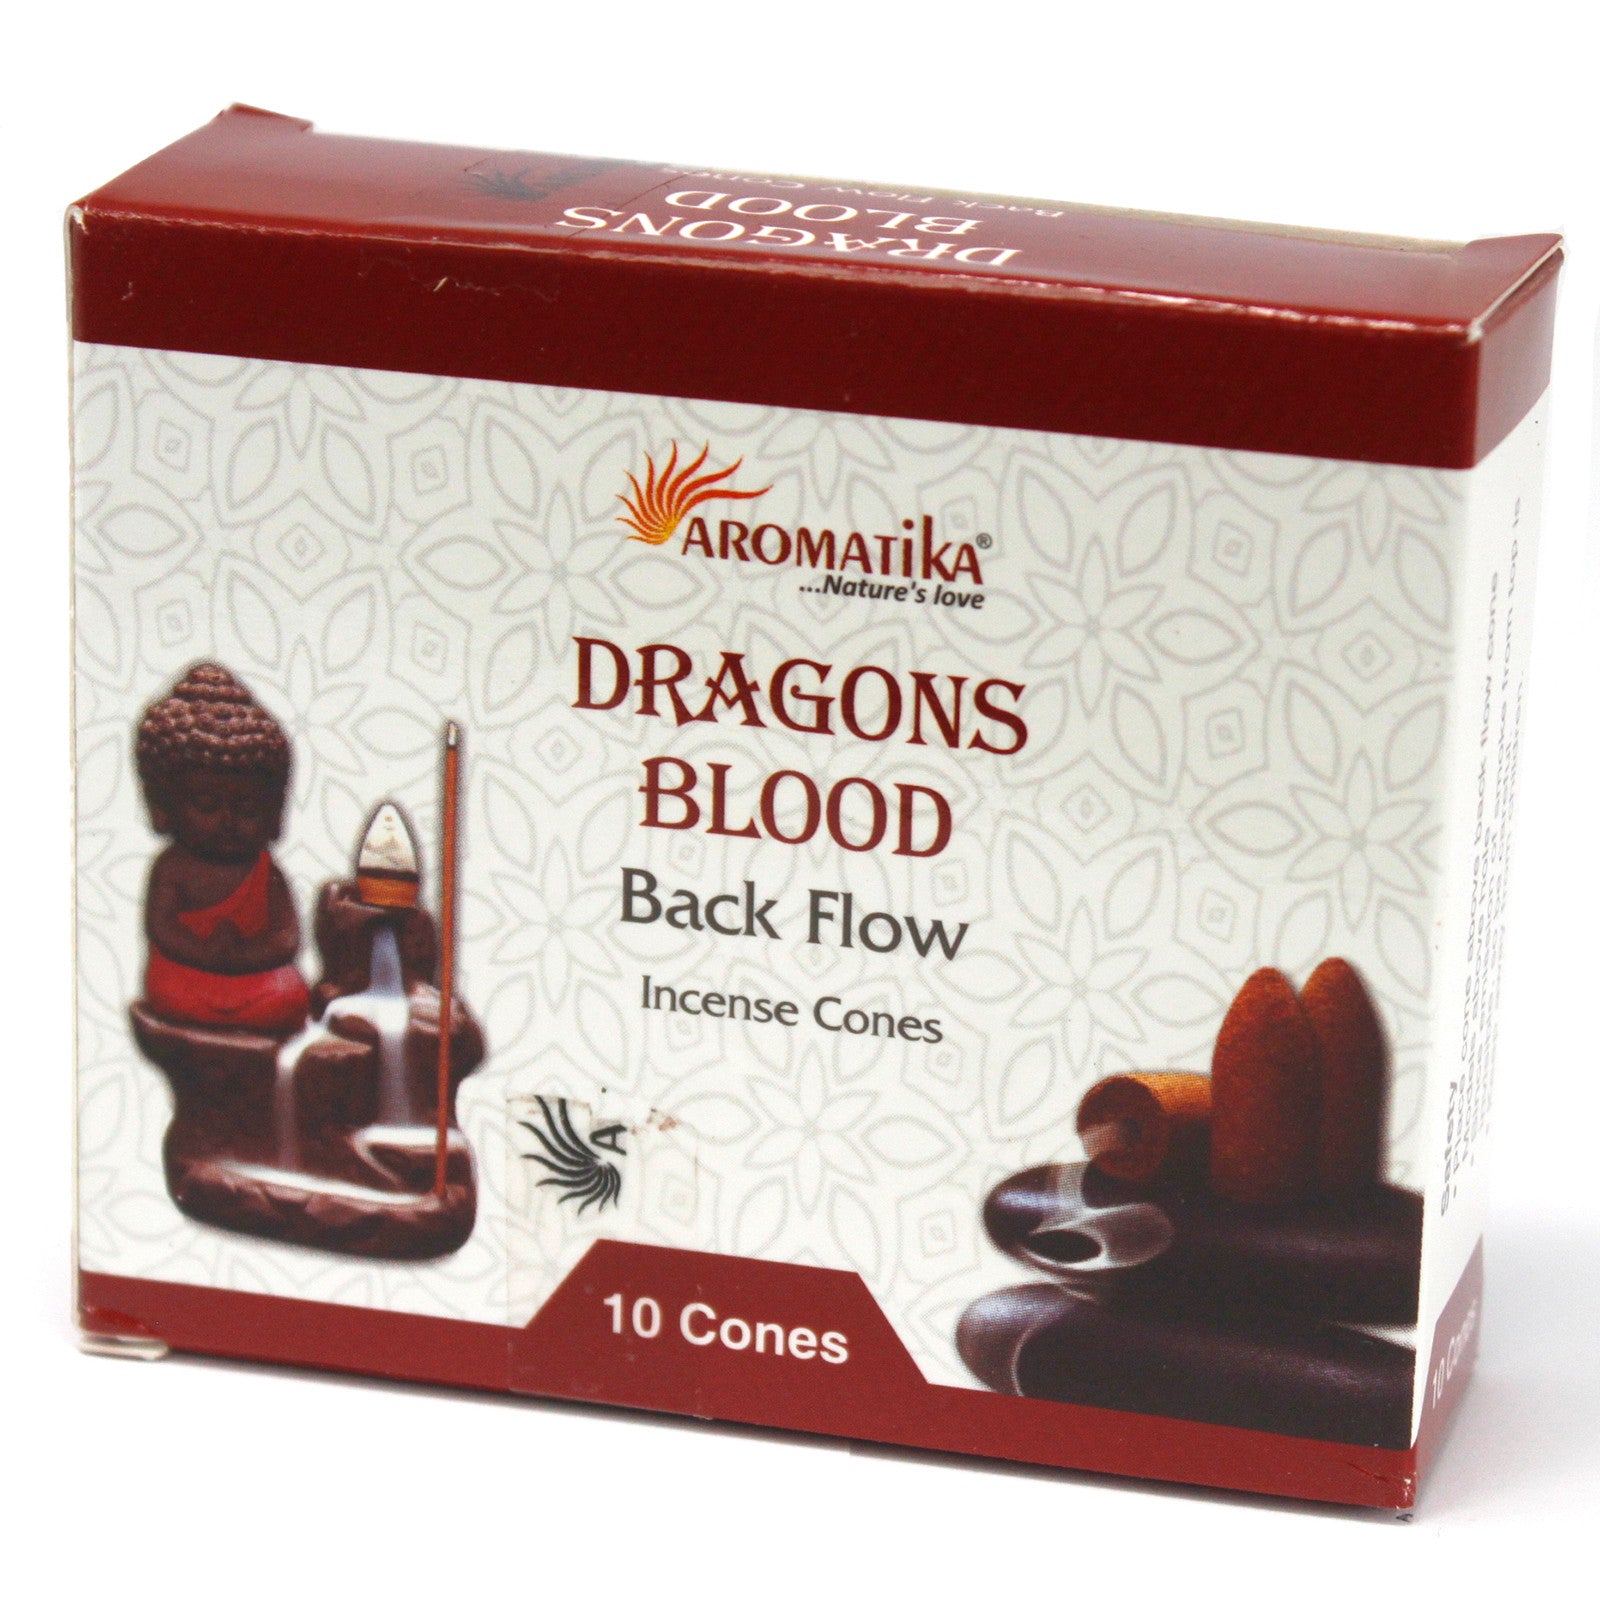 View Aromatica Backflow Incense Cones Dragons Blood information